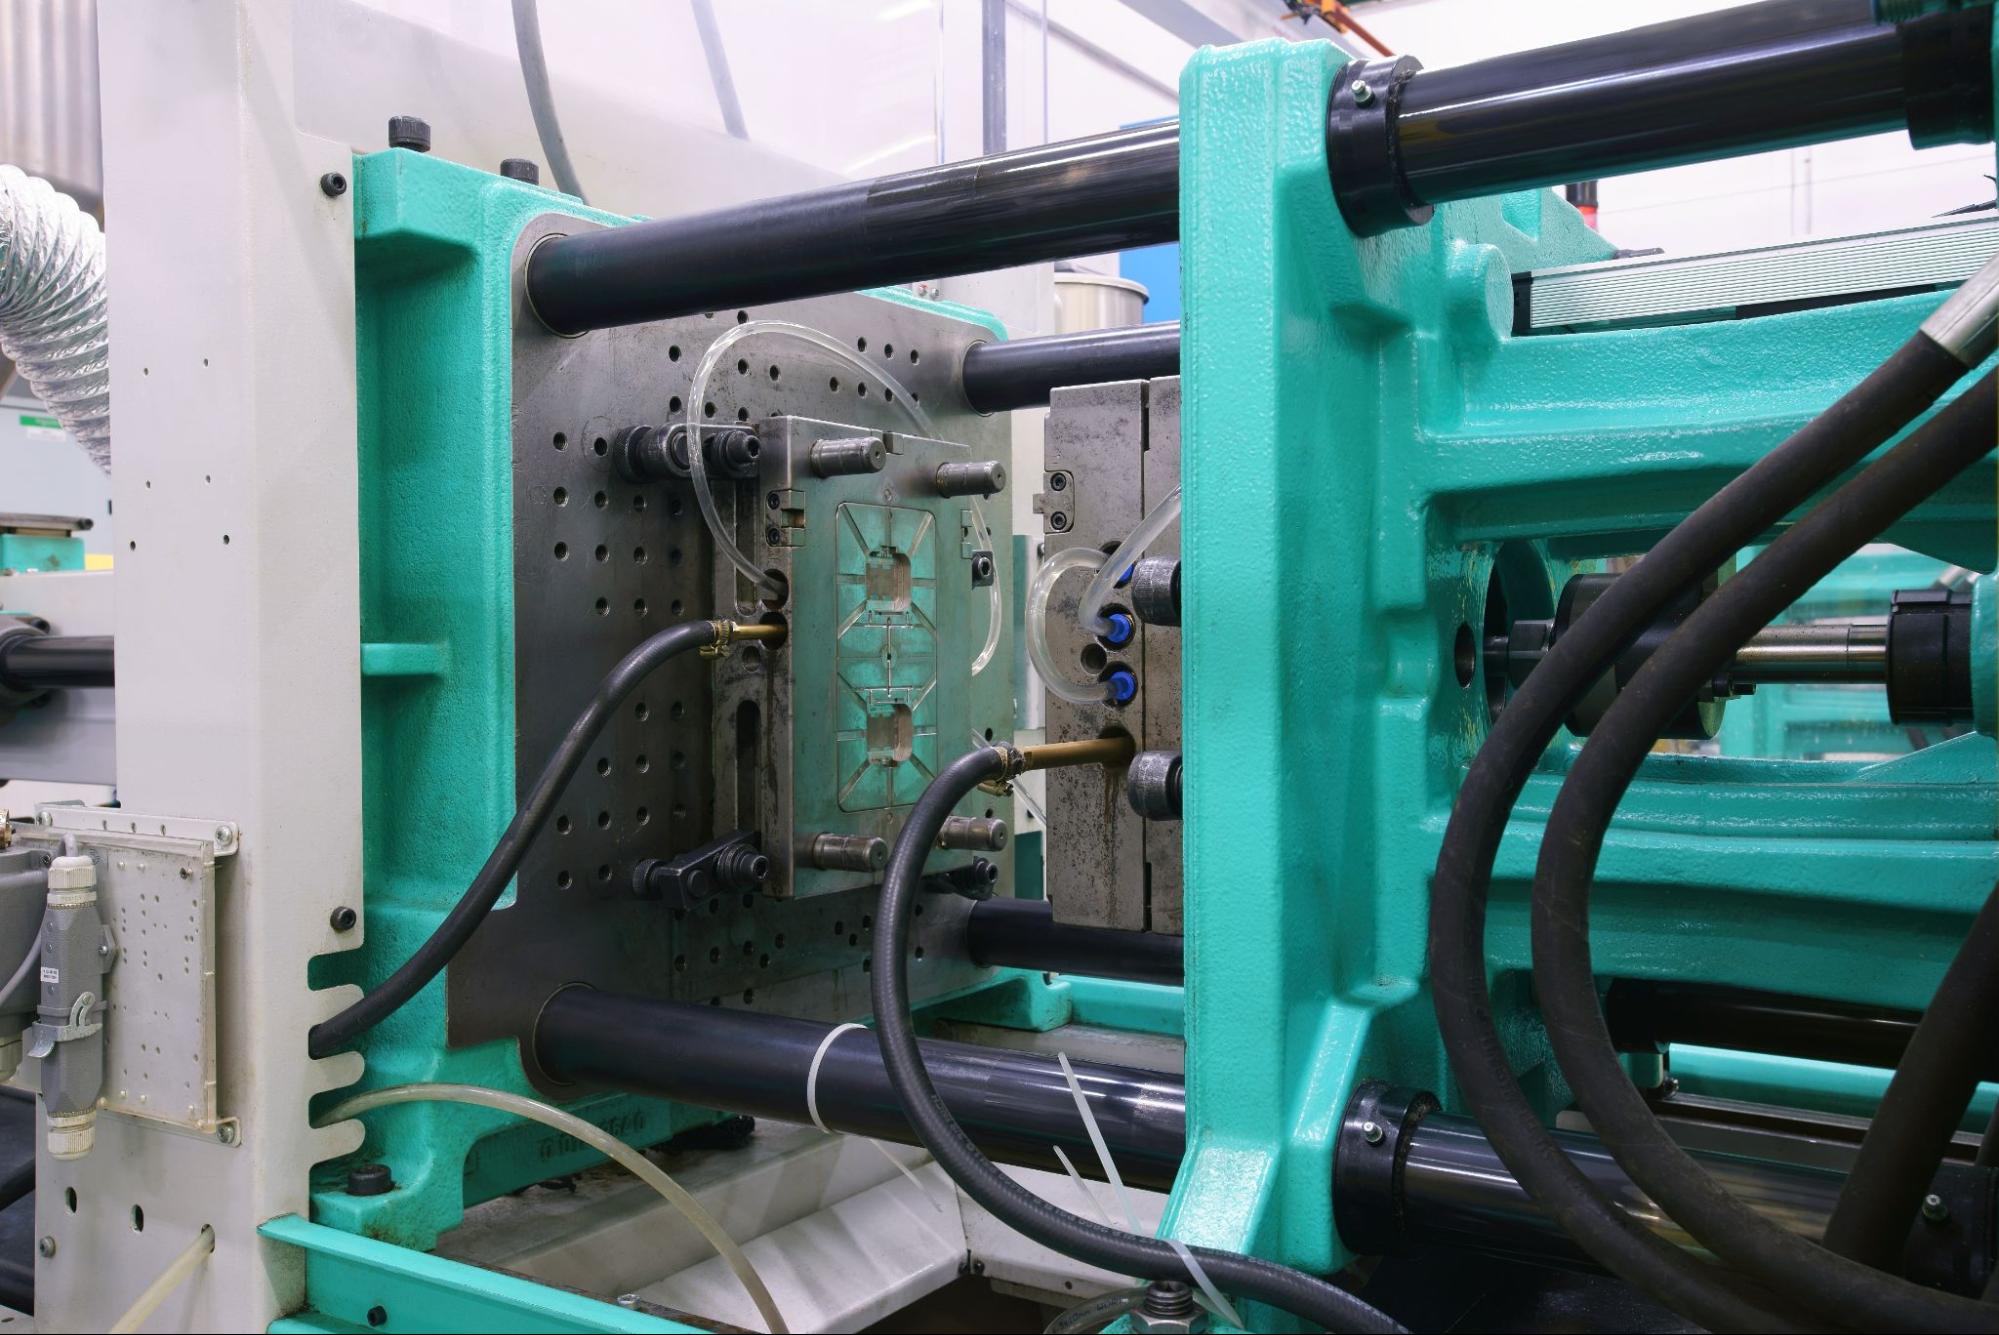 A teal colored injection molding press and steel mold.